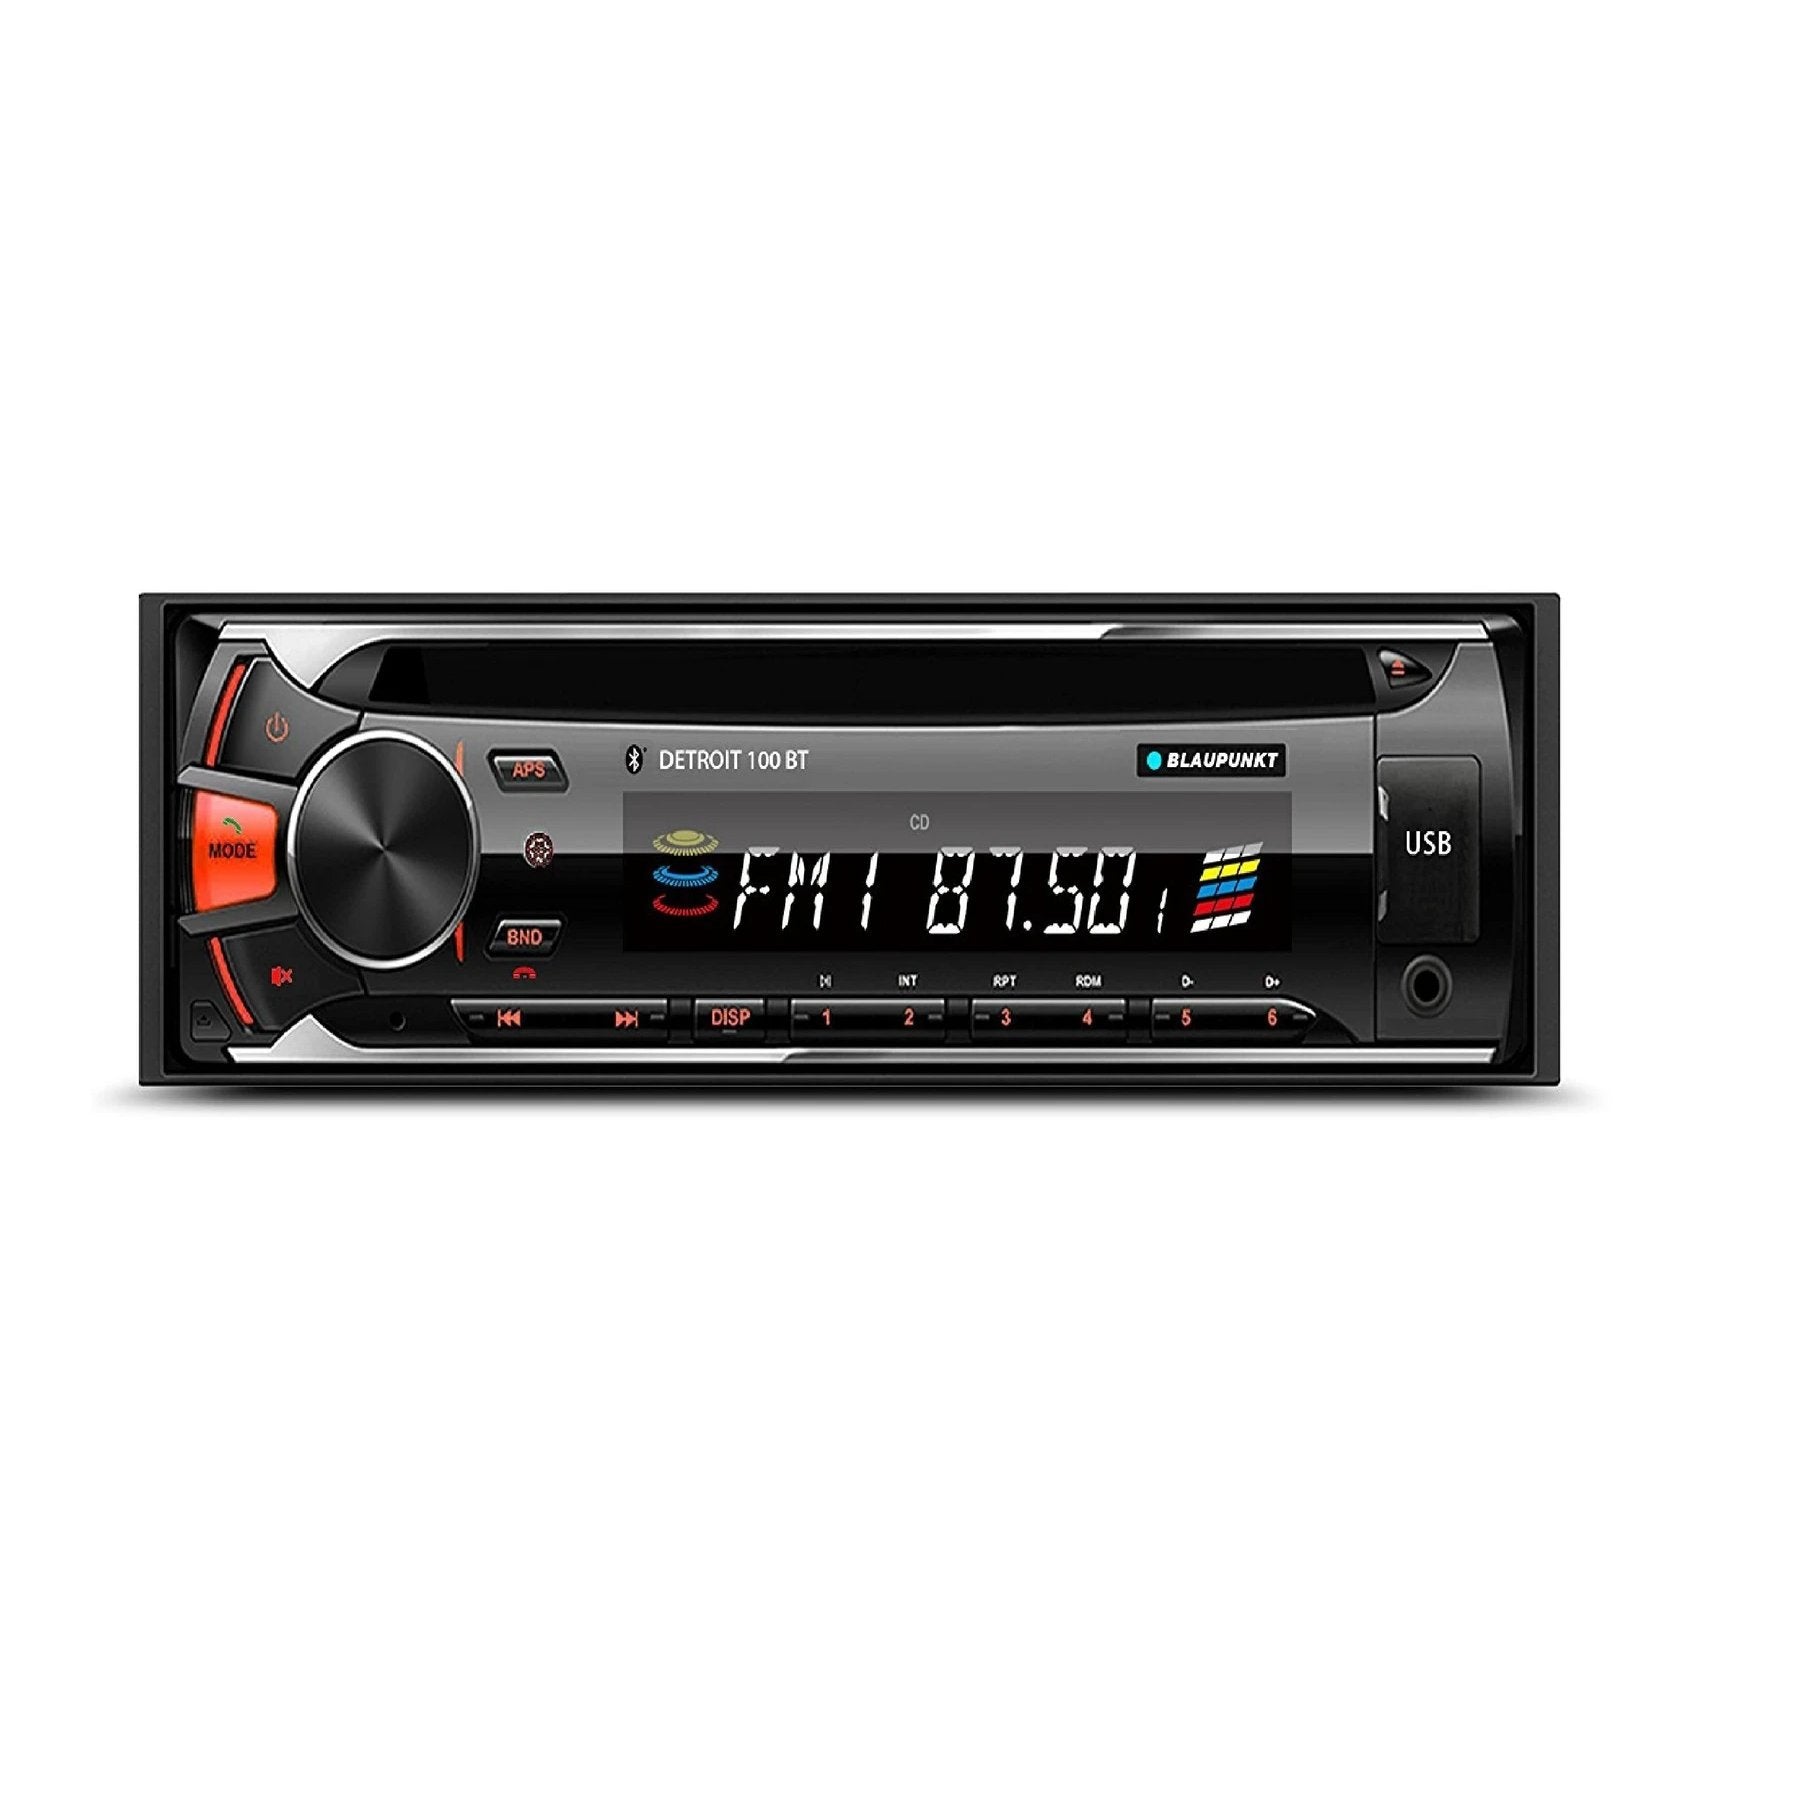 Golden Designs Blaupunkt FM CD Radio with Bluetooth and MP3 auxiliary connection.